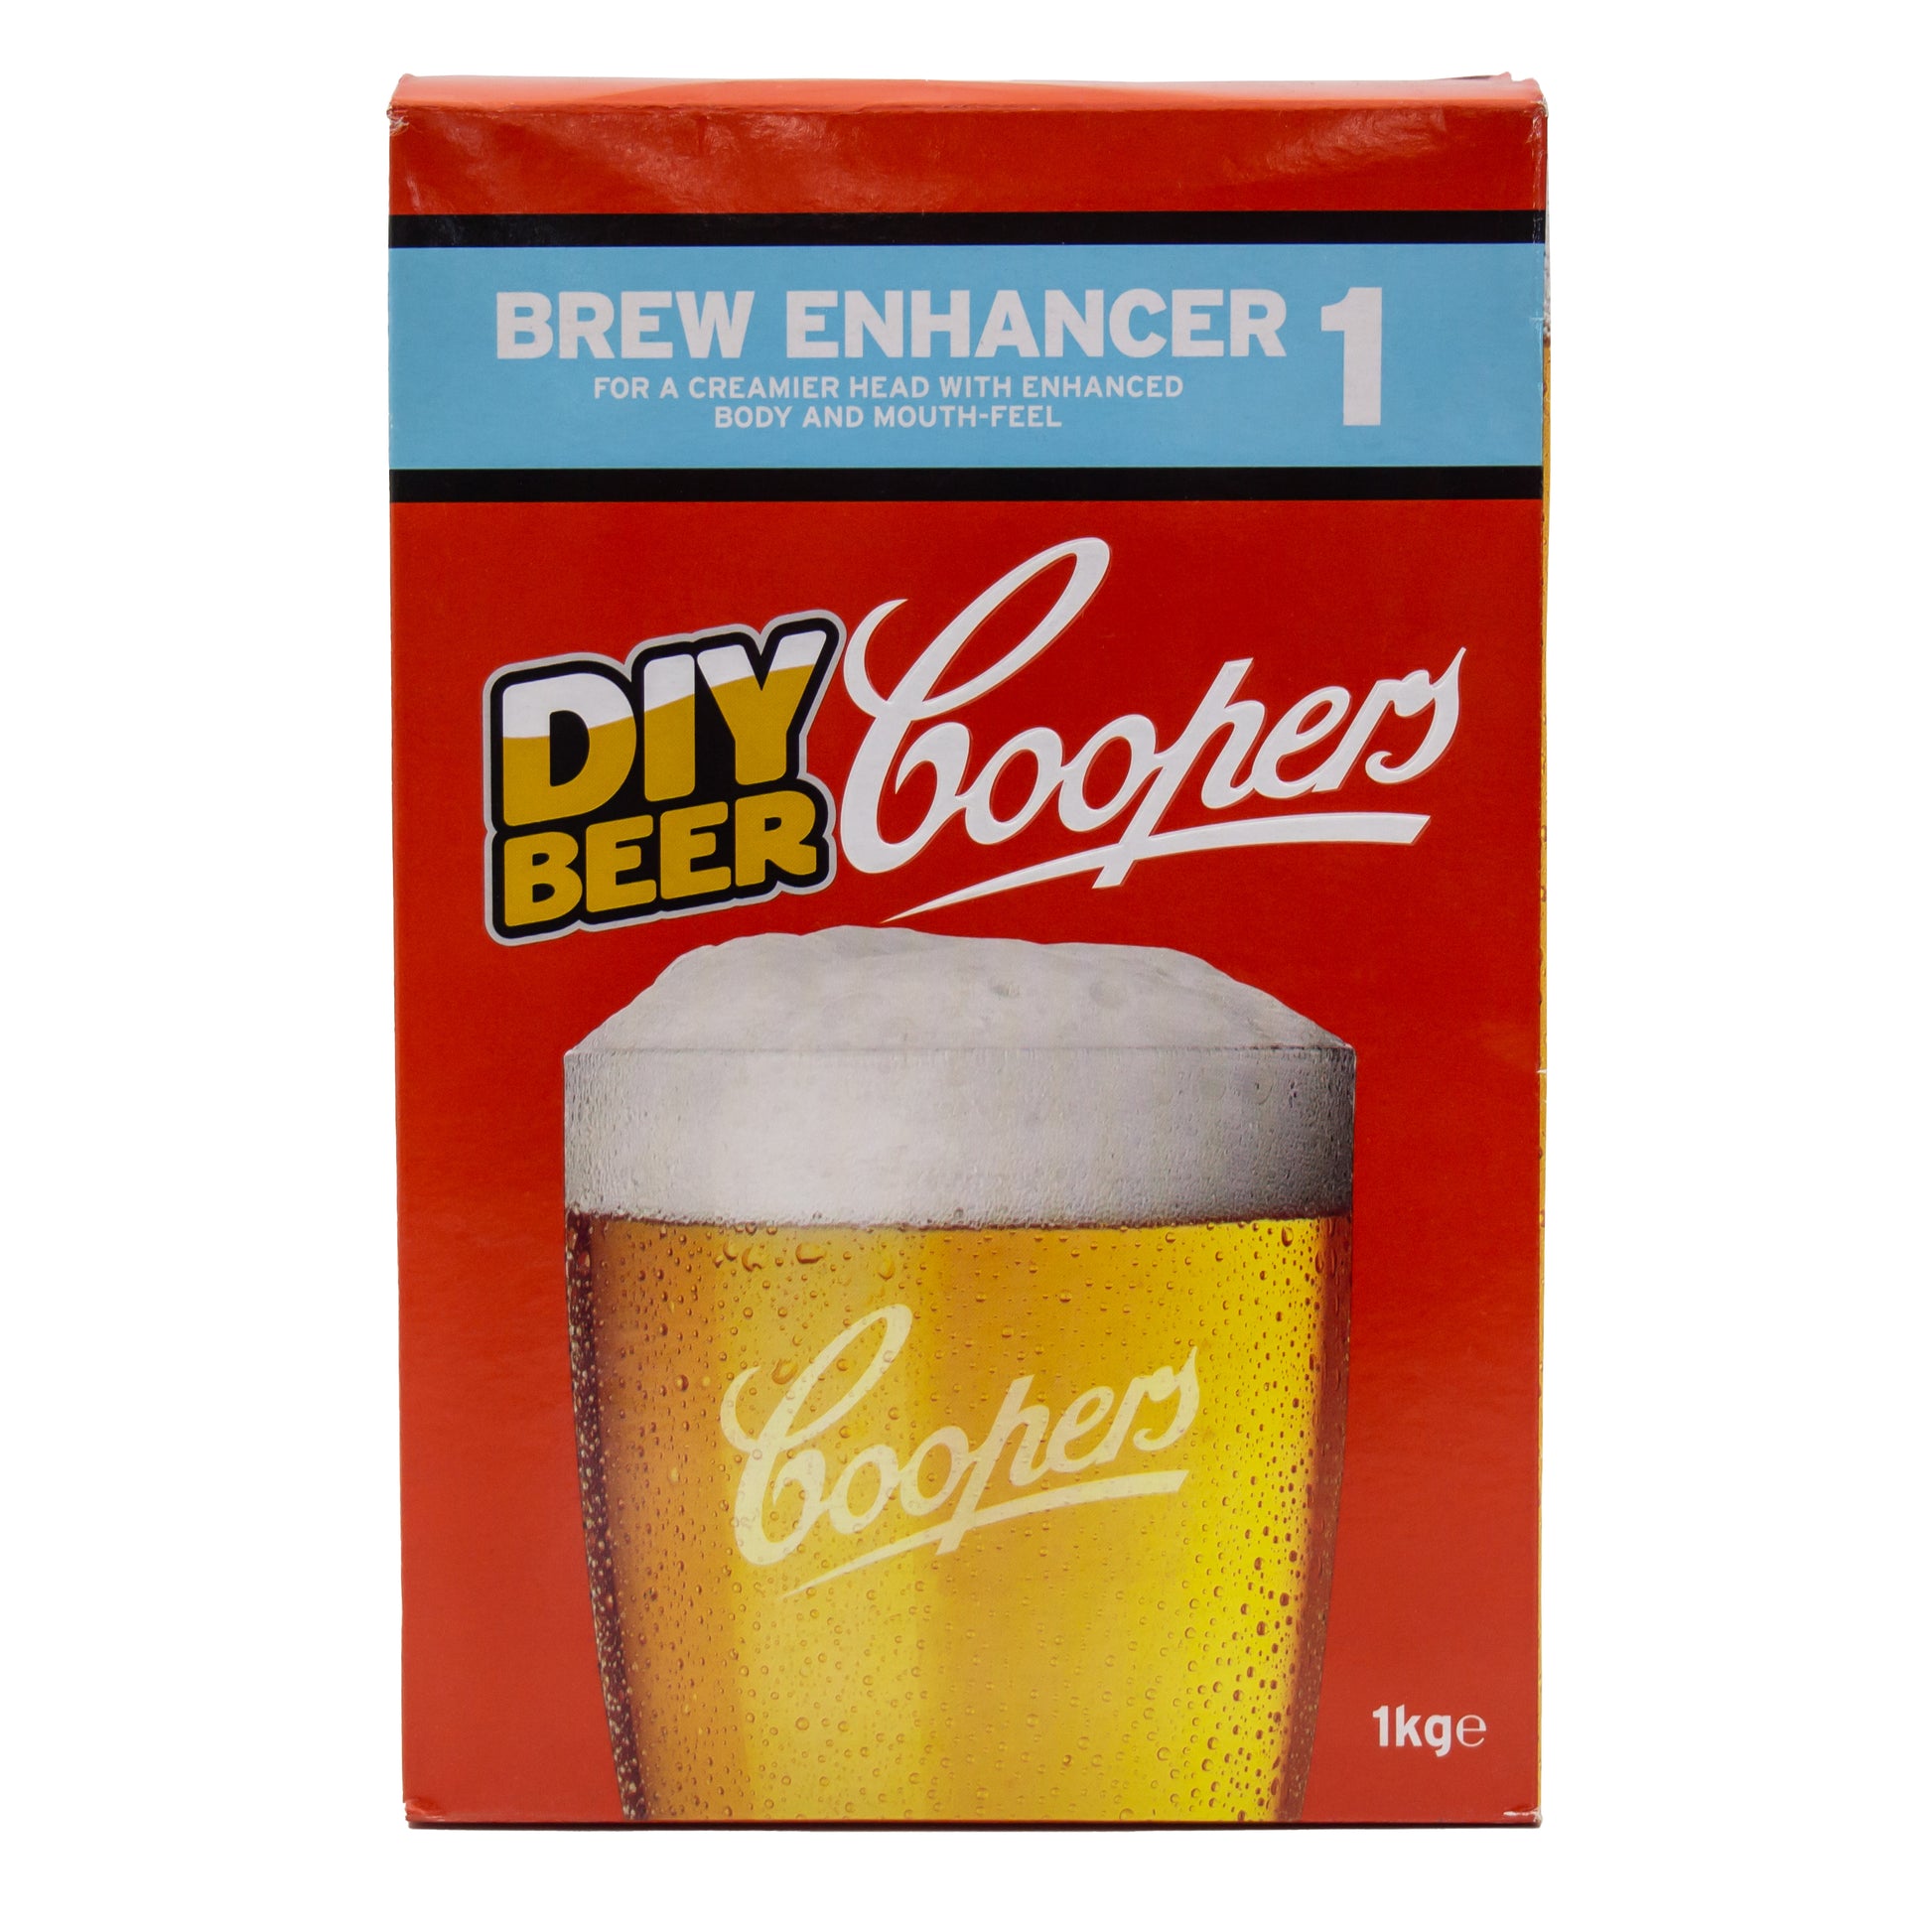 Box of Coopers brew enhancer 1 for home brewing